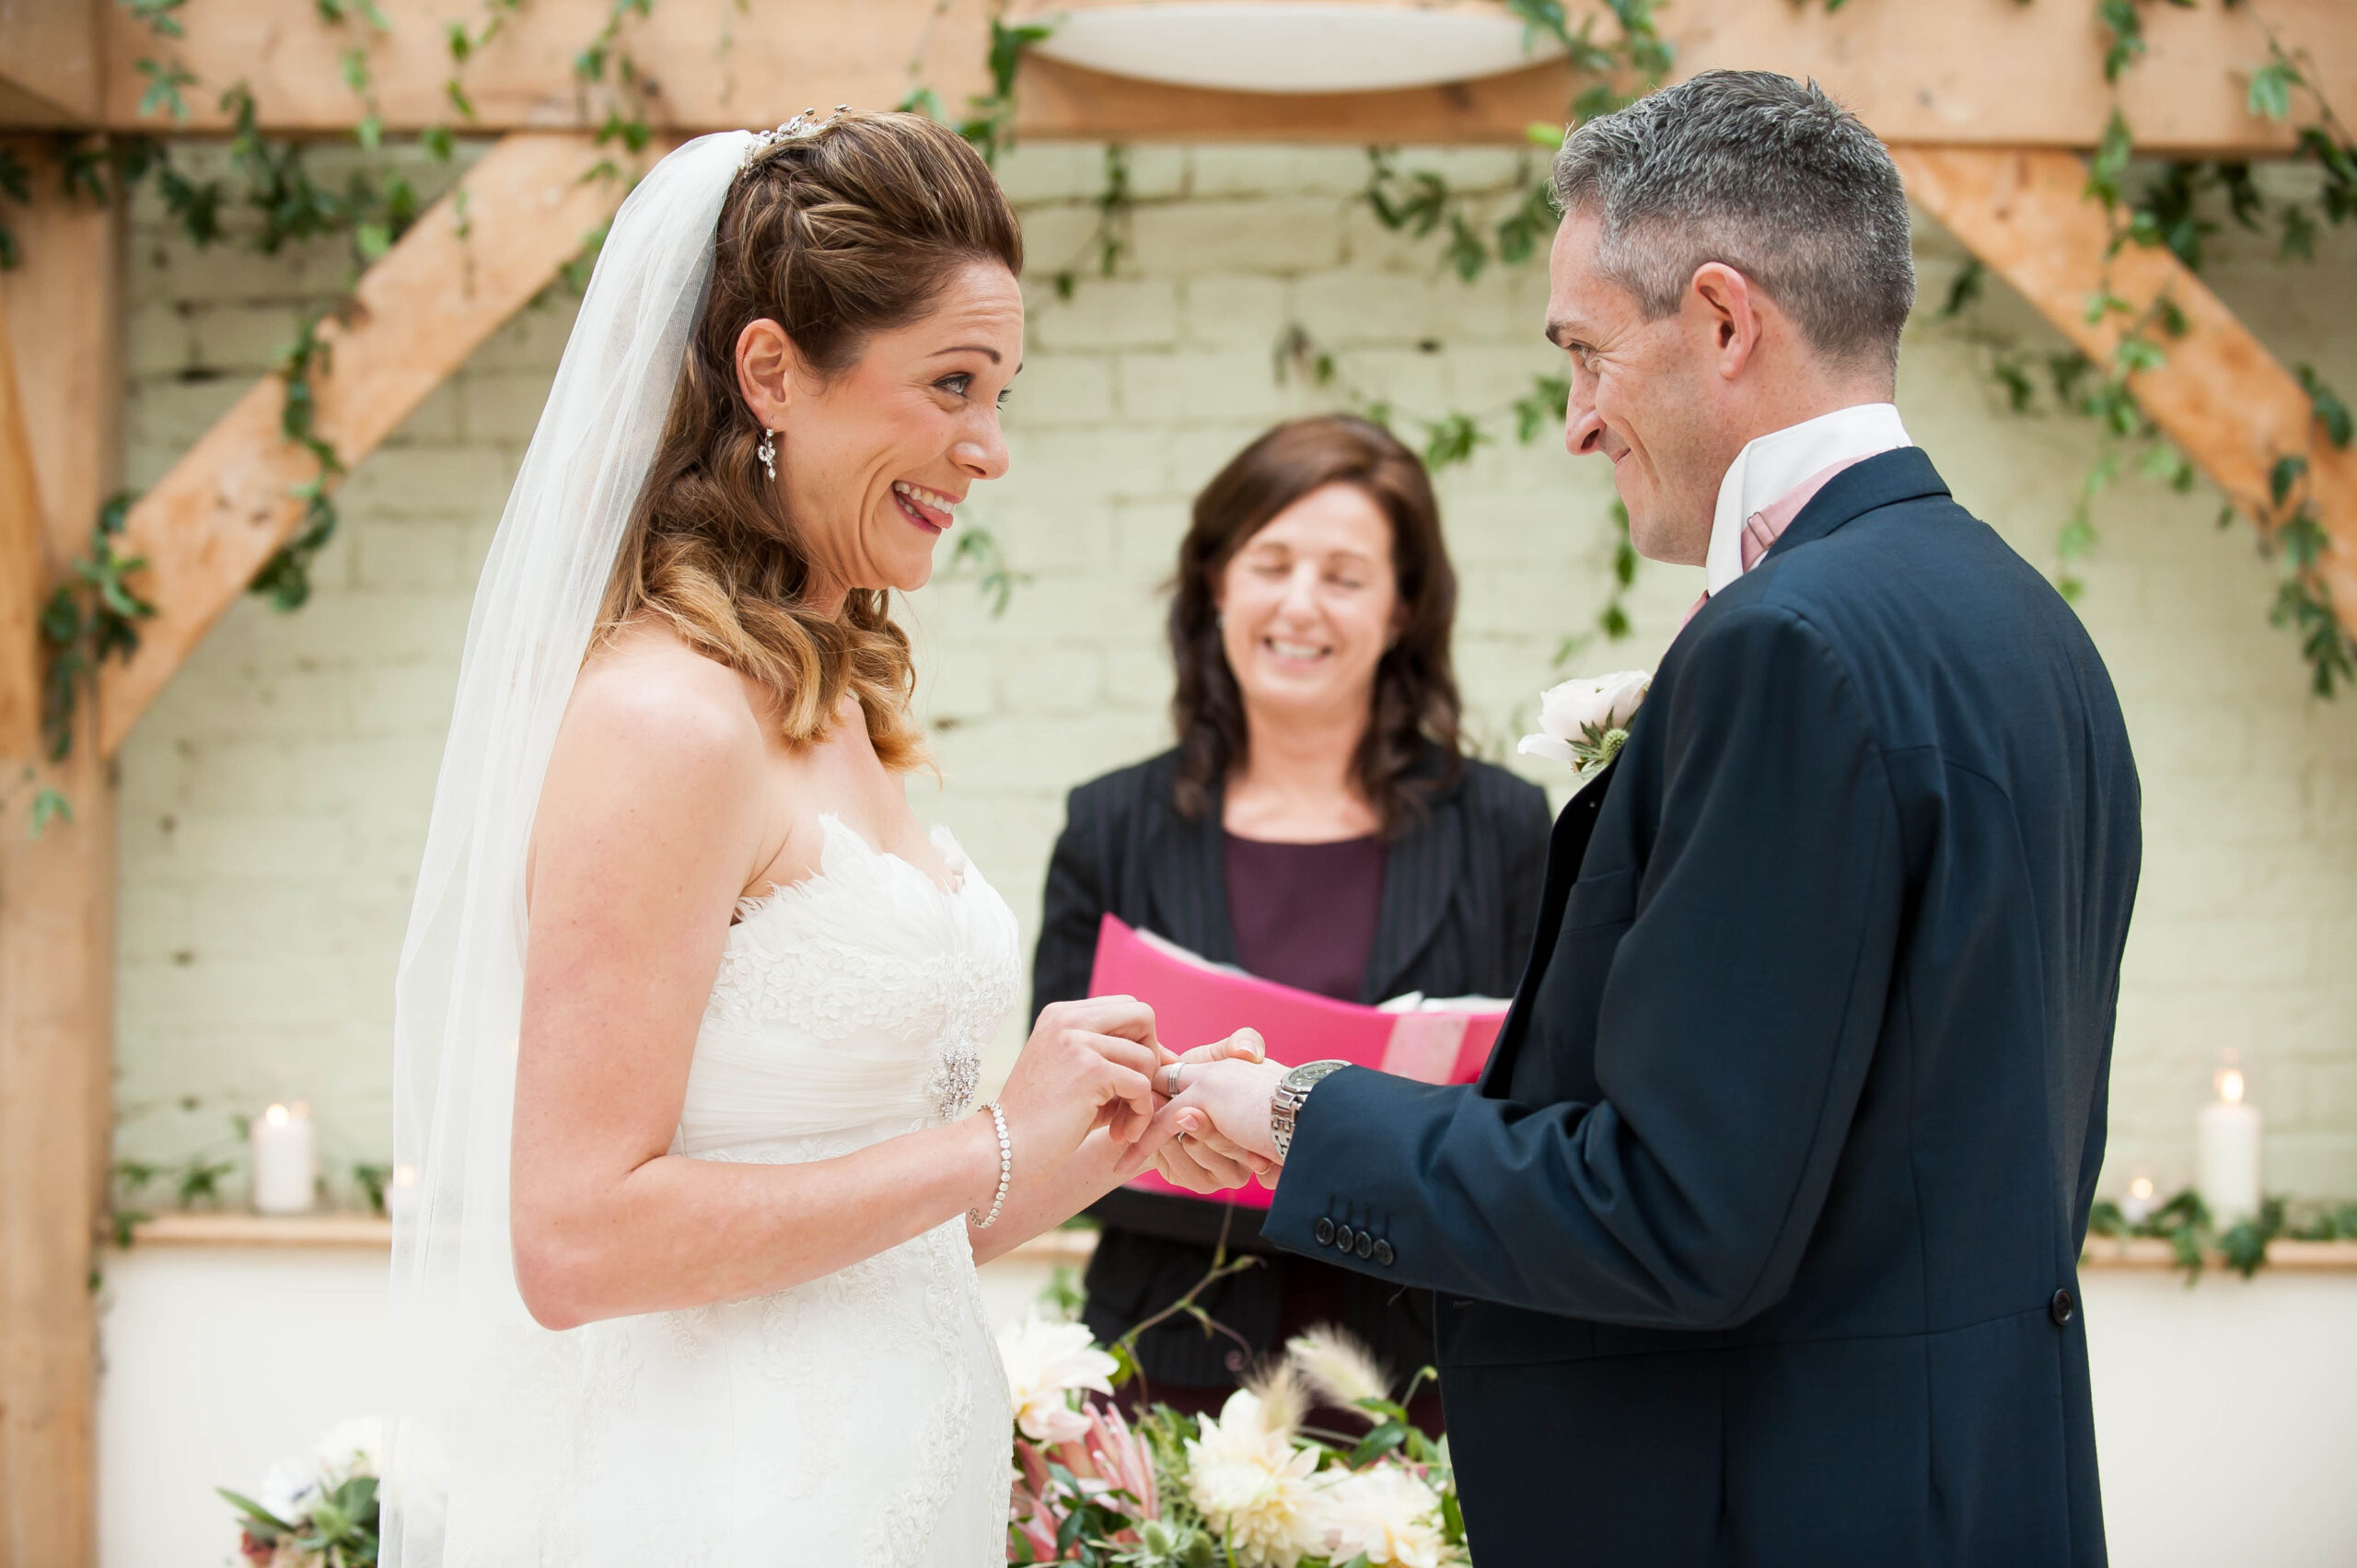 Hertfordshire wedding ceremony, by Tori Deslauriers Photography